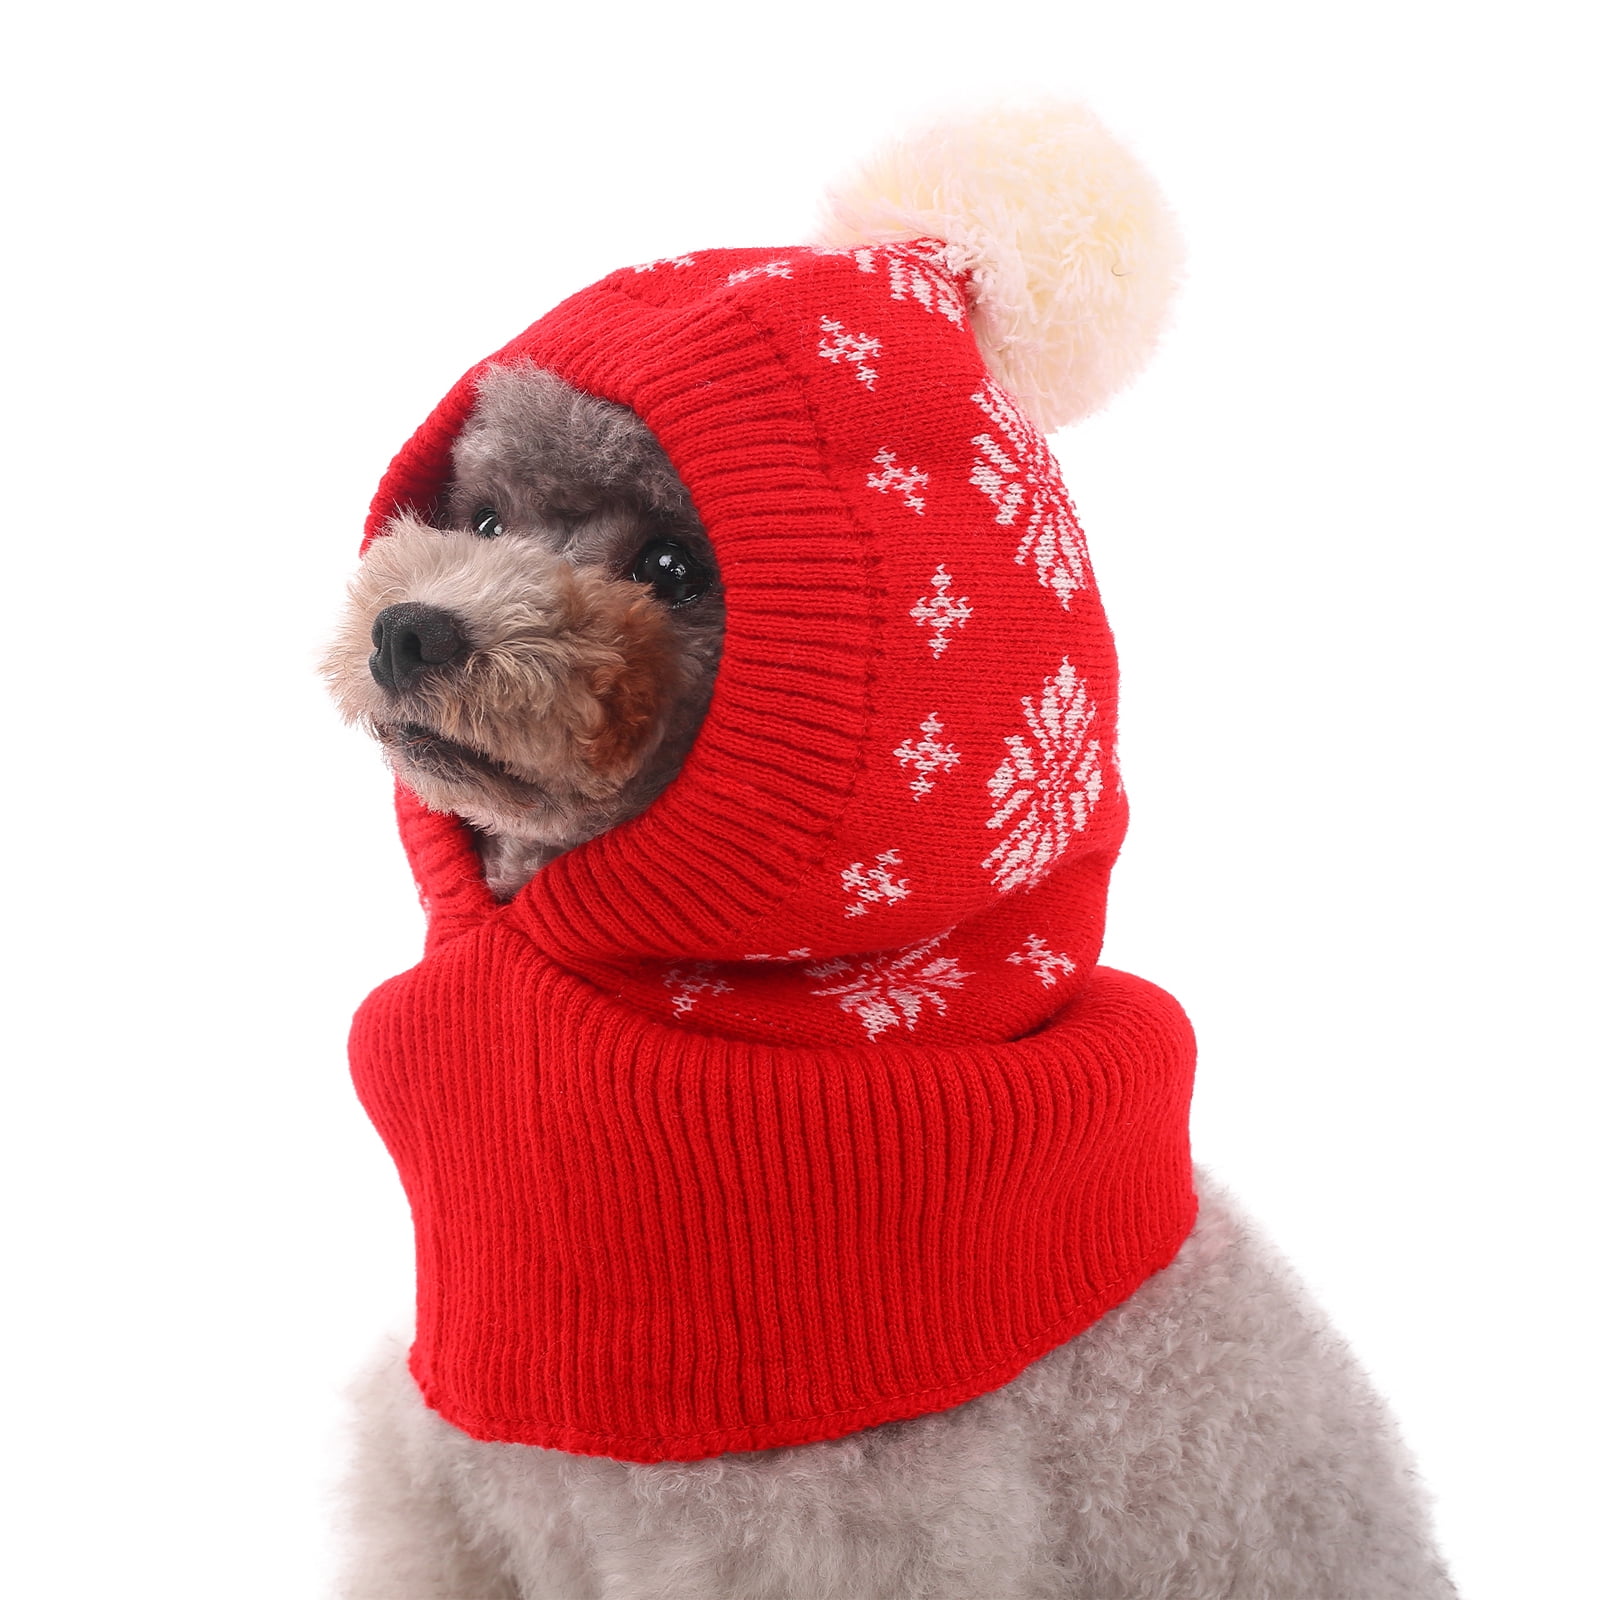 Raking Christmas Knitted Cotton Dog Hoody Turtleneck Sweater Jumper Costume Clothes Apparel Outfit XXL, Deer-Red